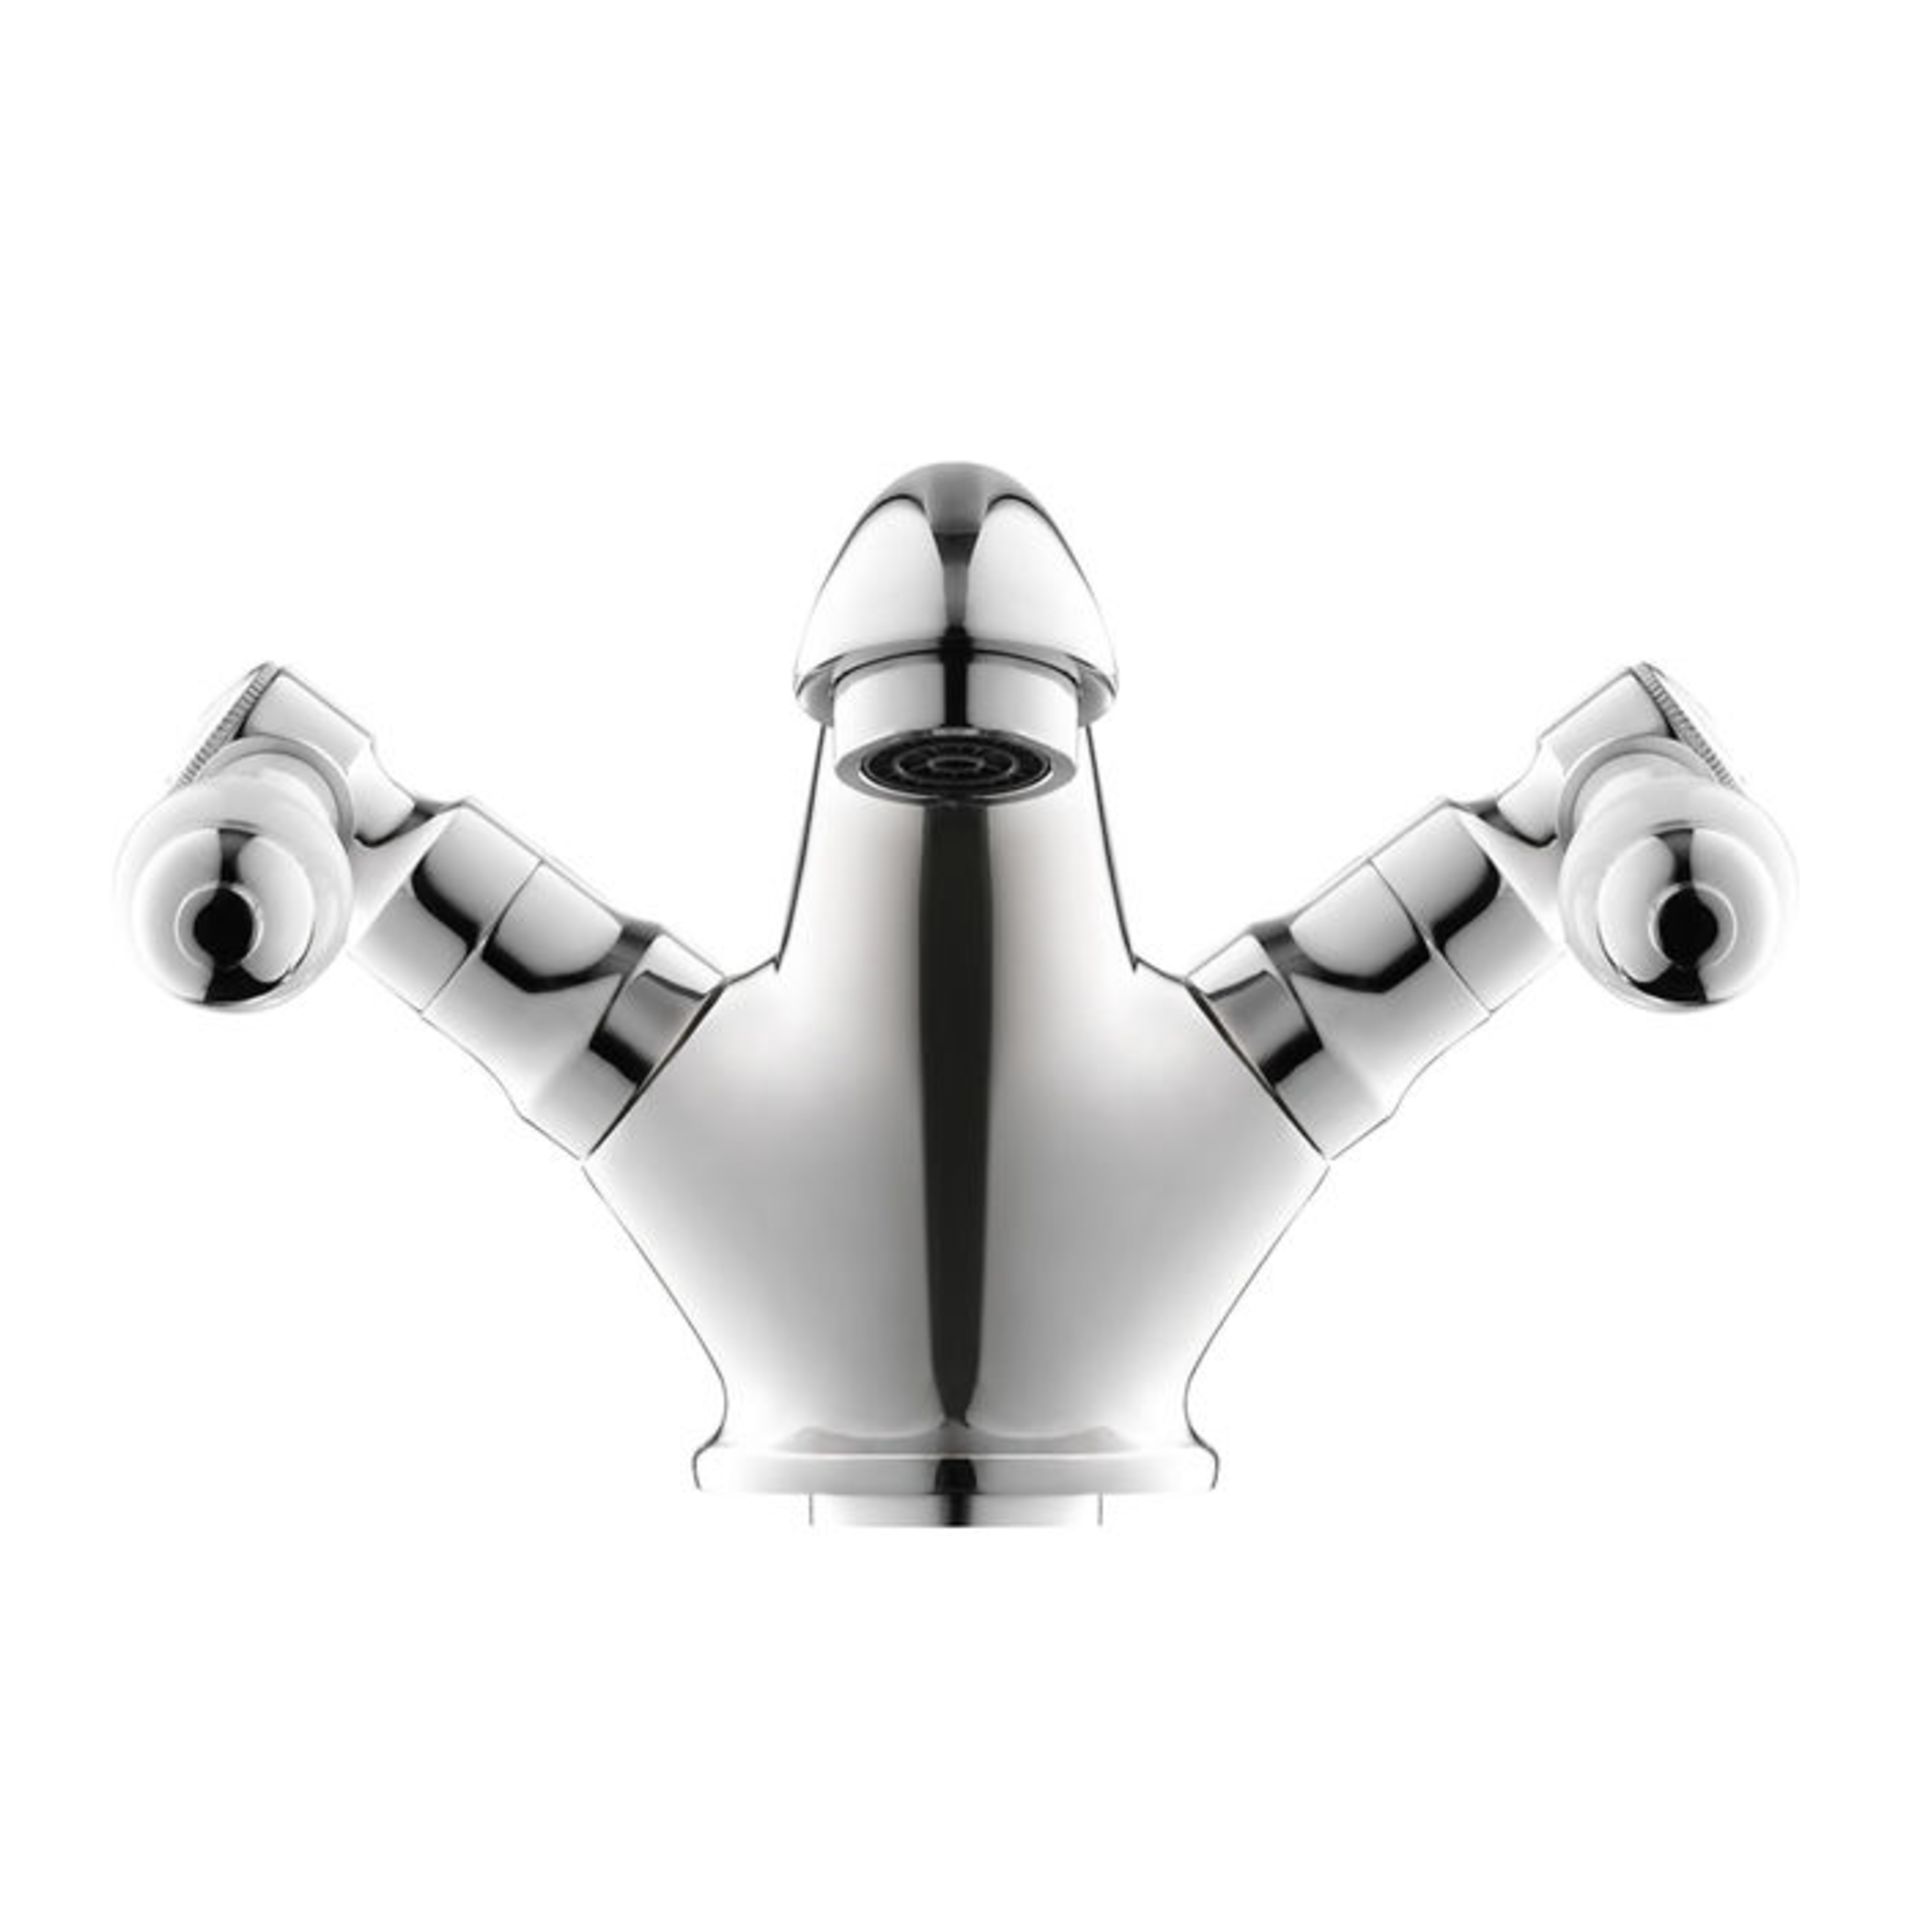 (Y210) Regal Chrome Traditional Basin Sink Lever Mixer Tap. Chrome Plated Solid Brass Mixer - Image 4 of 6